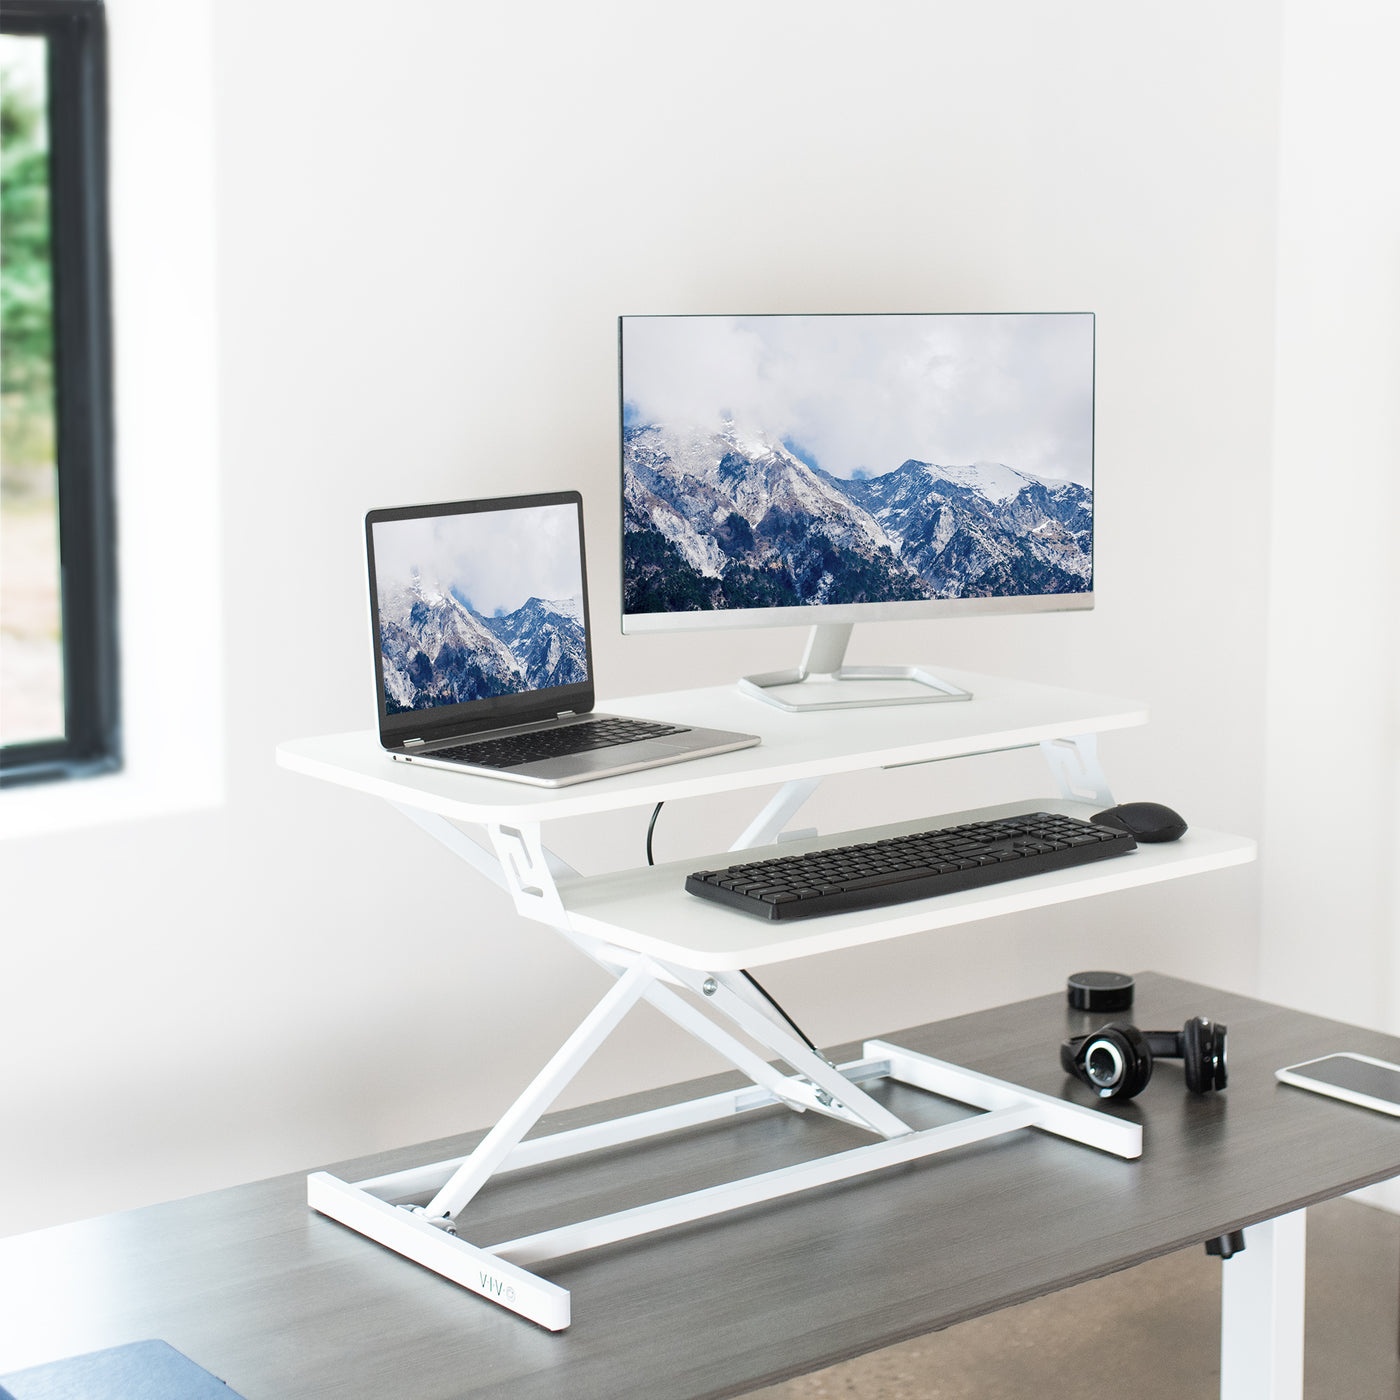 Modern and ergonomic designed office space with desk converter.